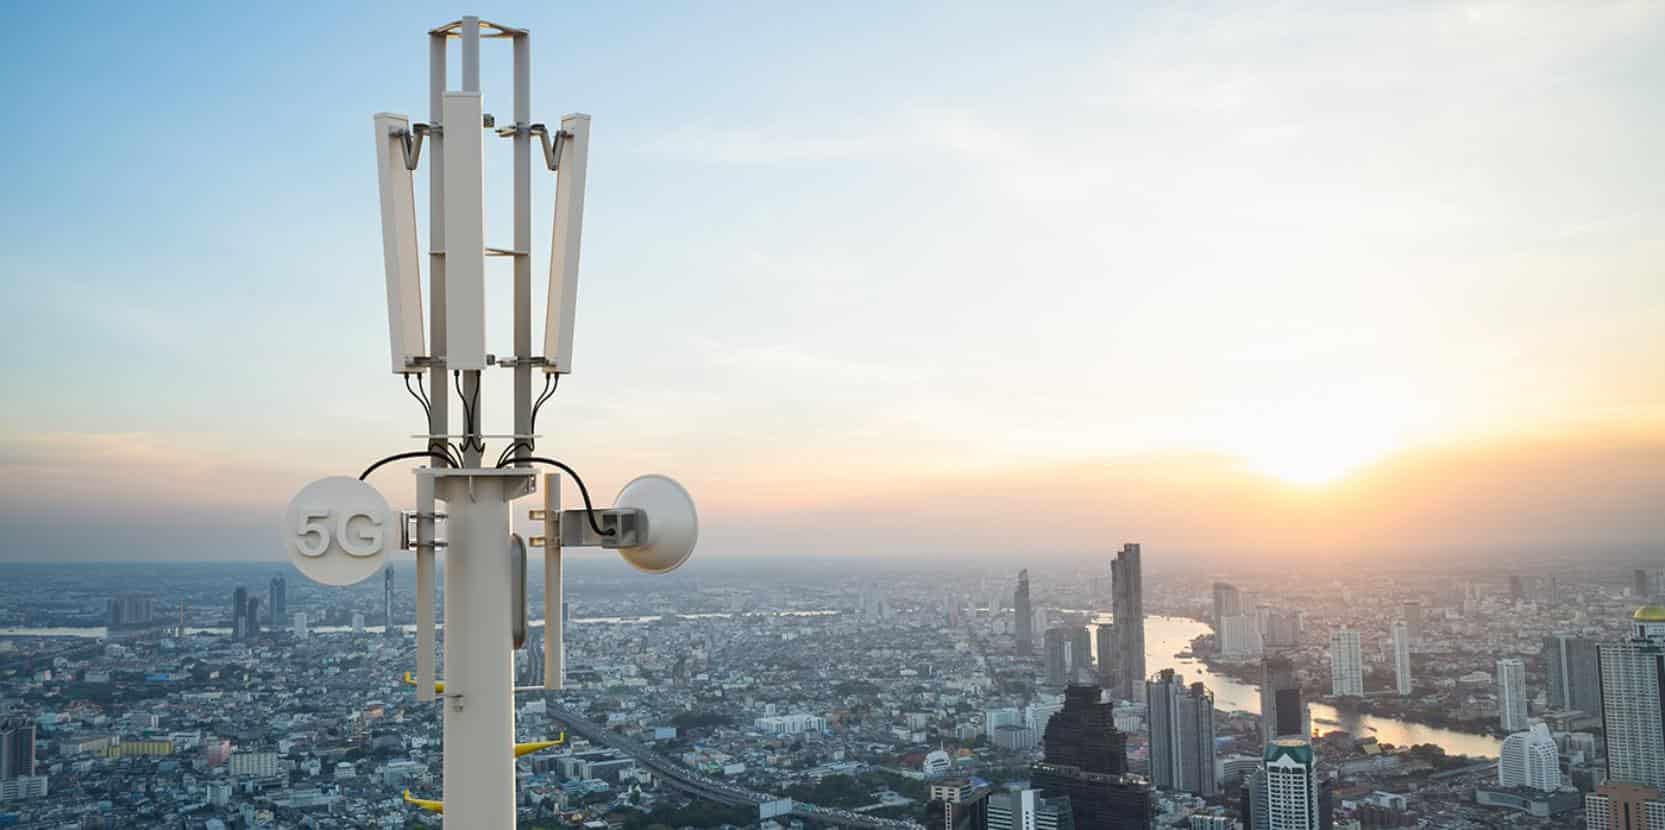 Optus and Ericsson Launch Australia's Most Energy-Efficient Radio Access Network Facility